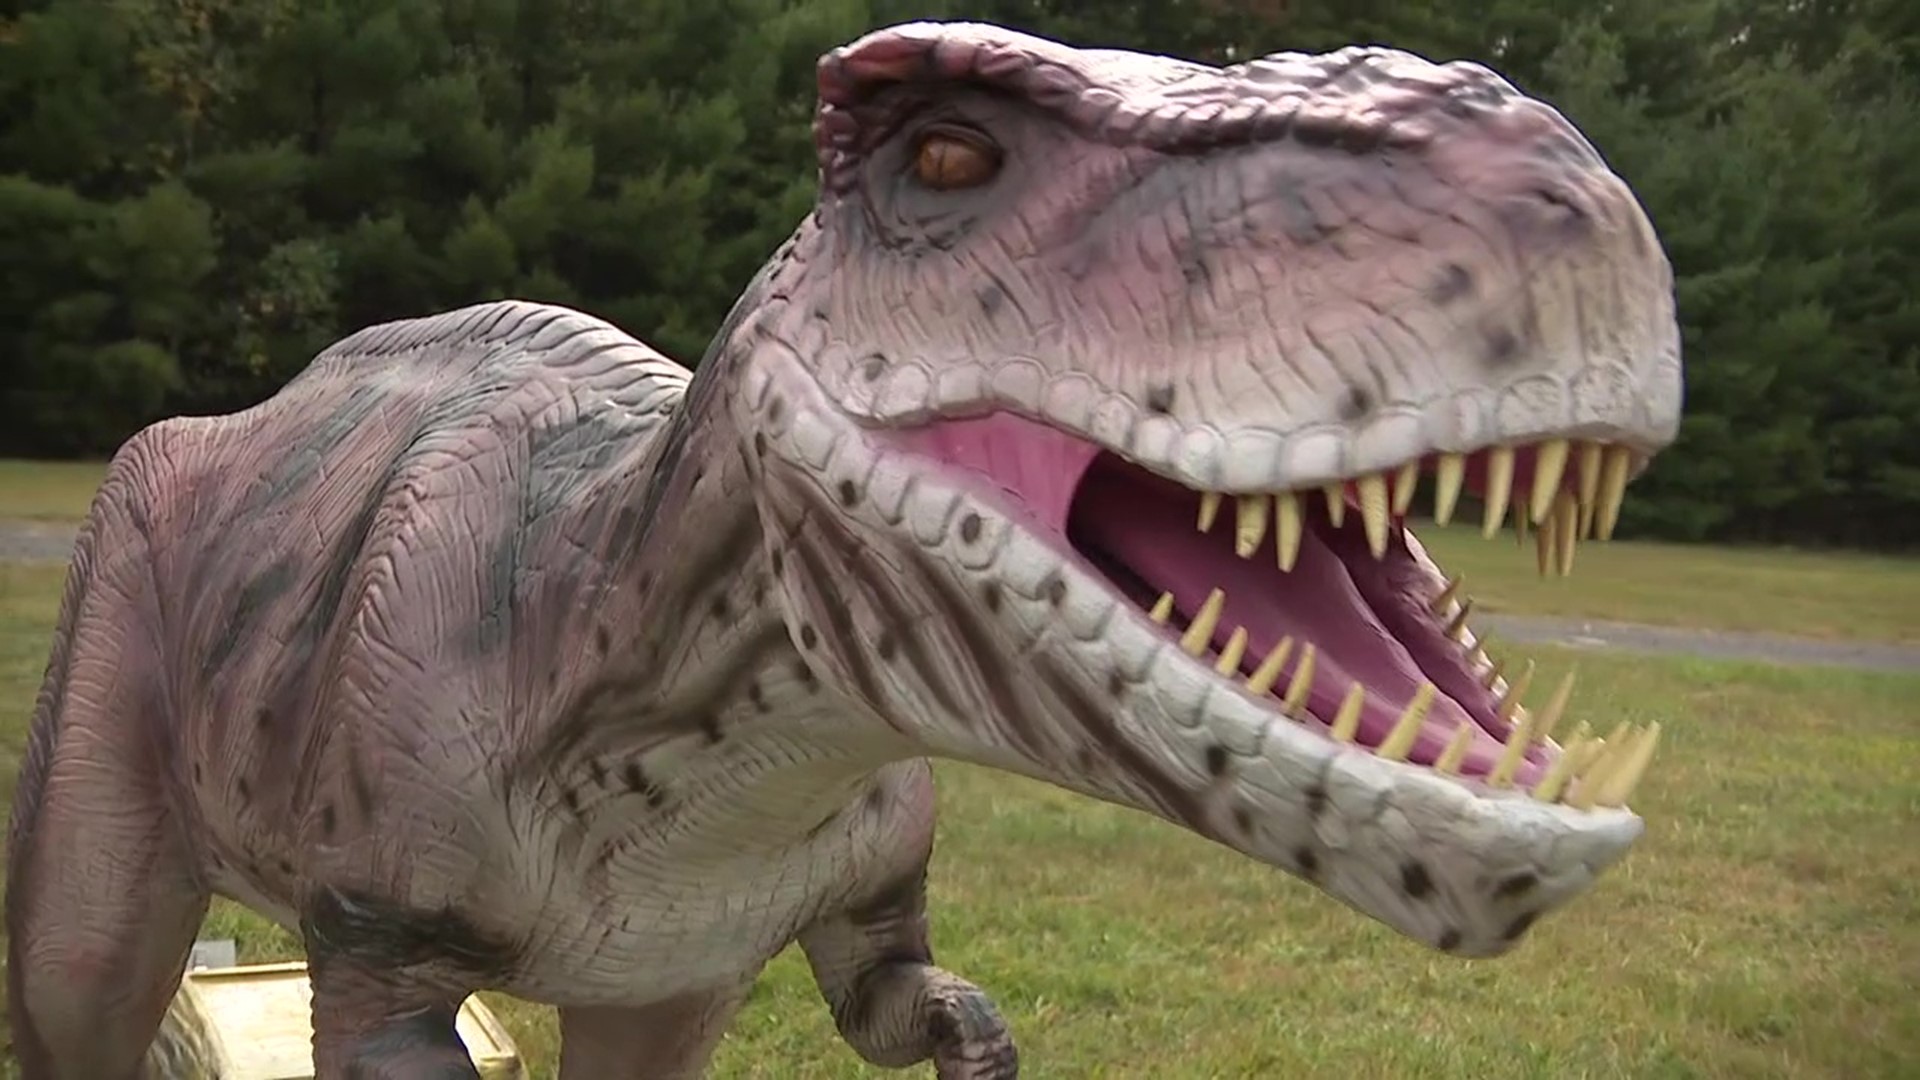 Dinosaur exhibit will be at the Schuylkill County Fairgrounds this weekend